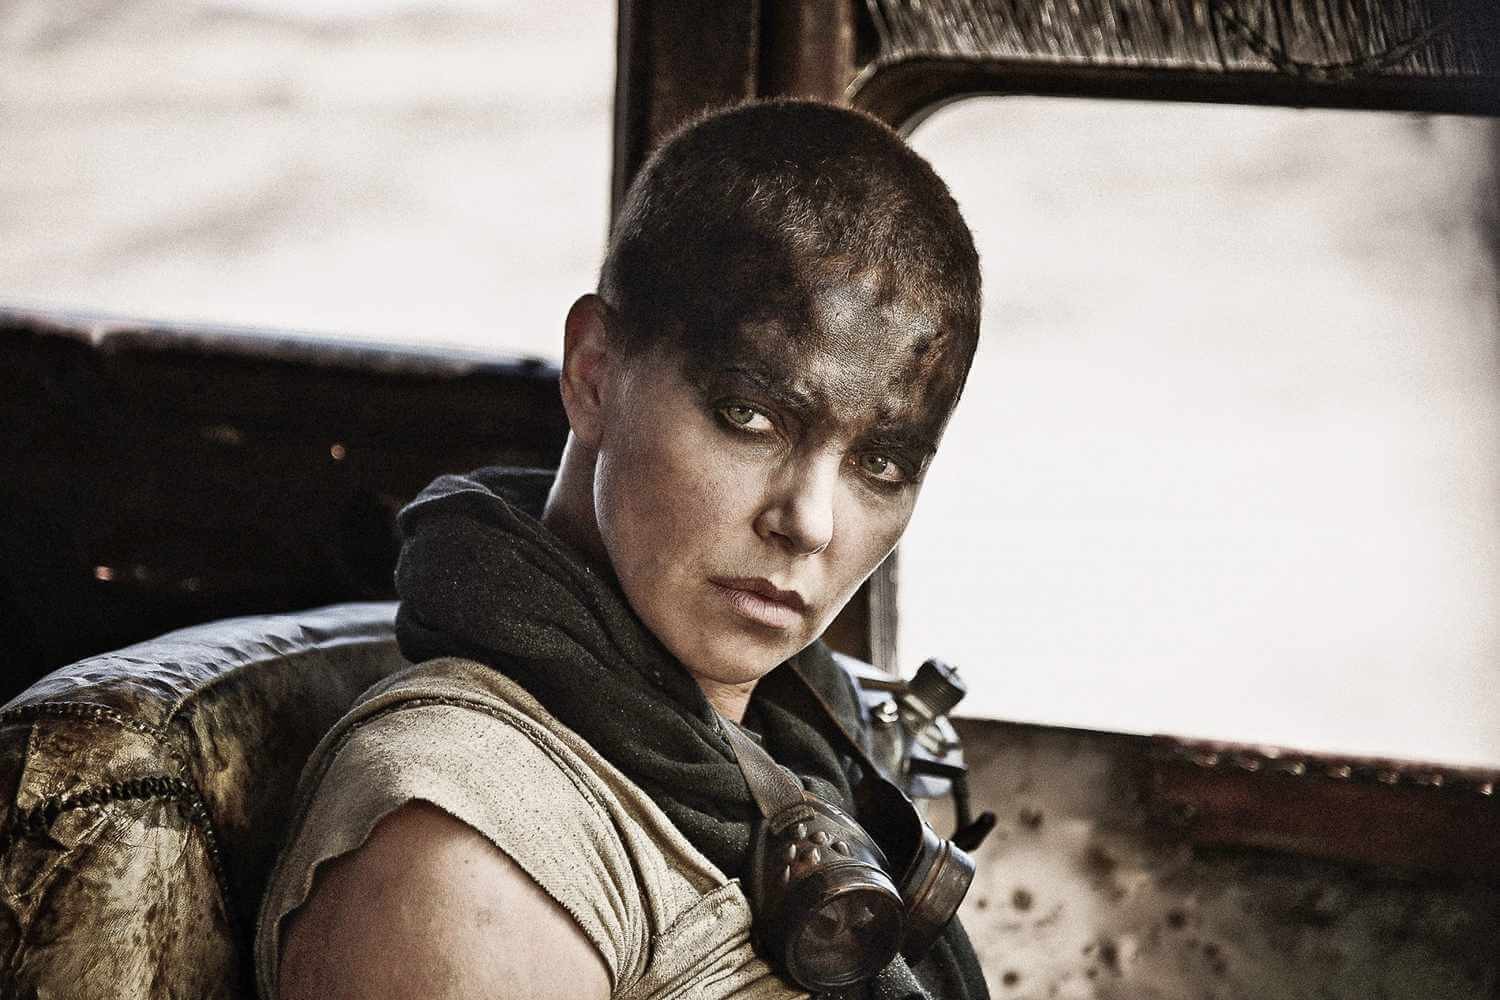 Anya Taylor-Joy is the perfect casting to play a younger version of Charlize Theron from Mad Max: Fury Road